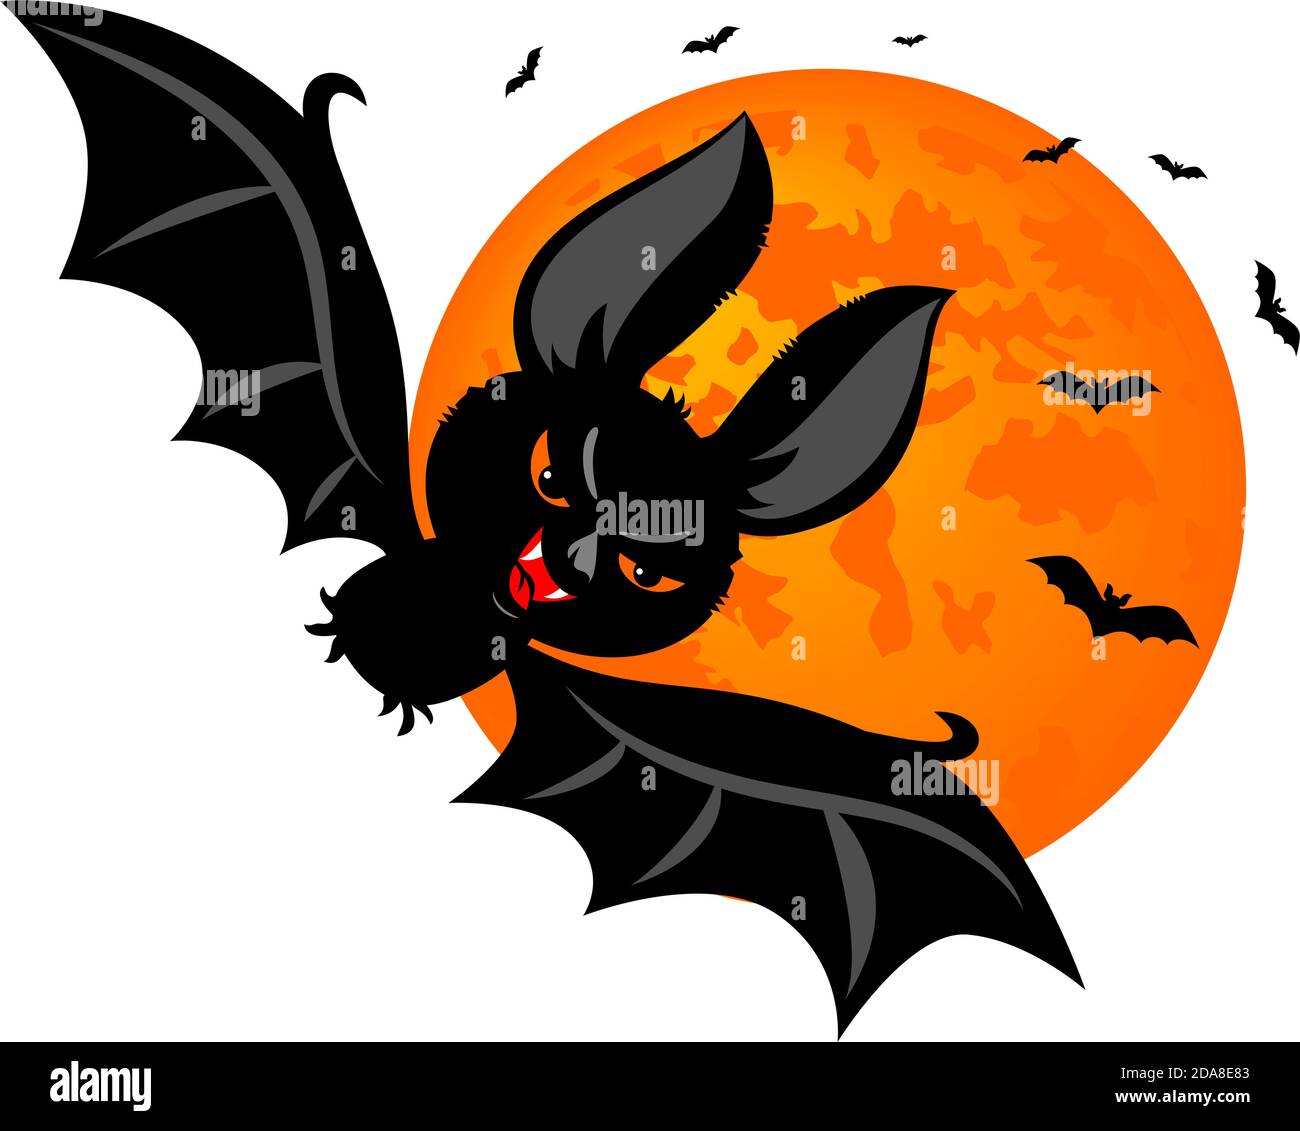 Cartoon Vampire Bat Monster Horror Photo Background And Picture For Free  Download - Pngtree